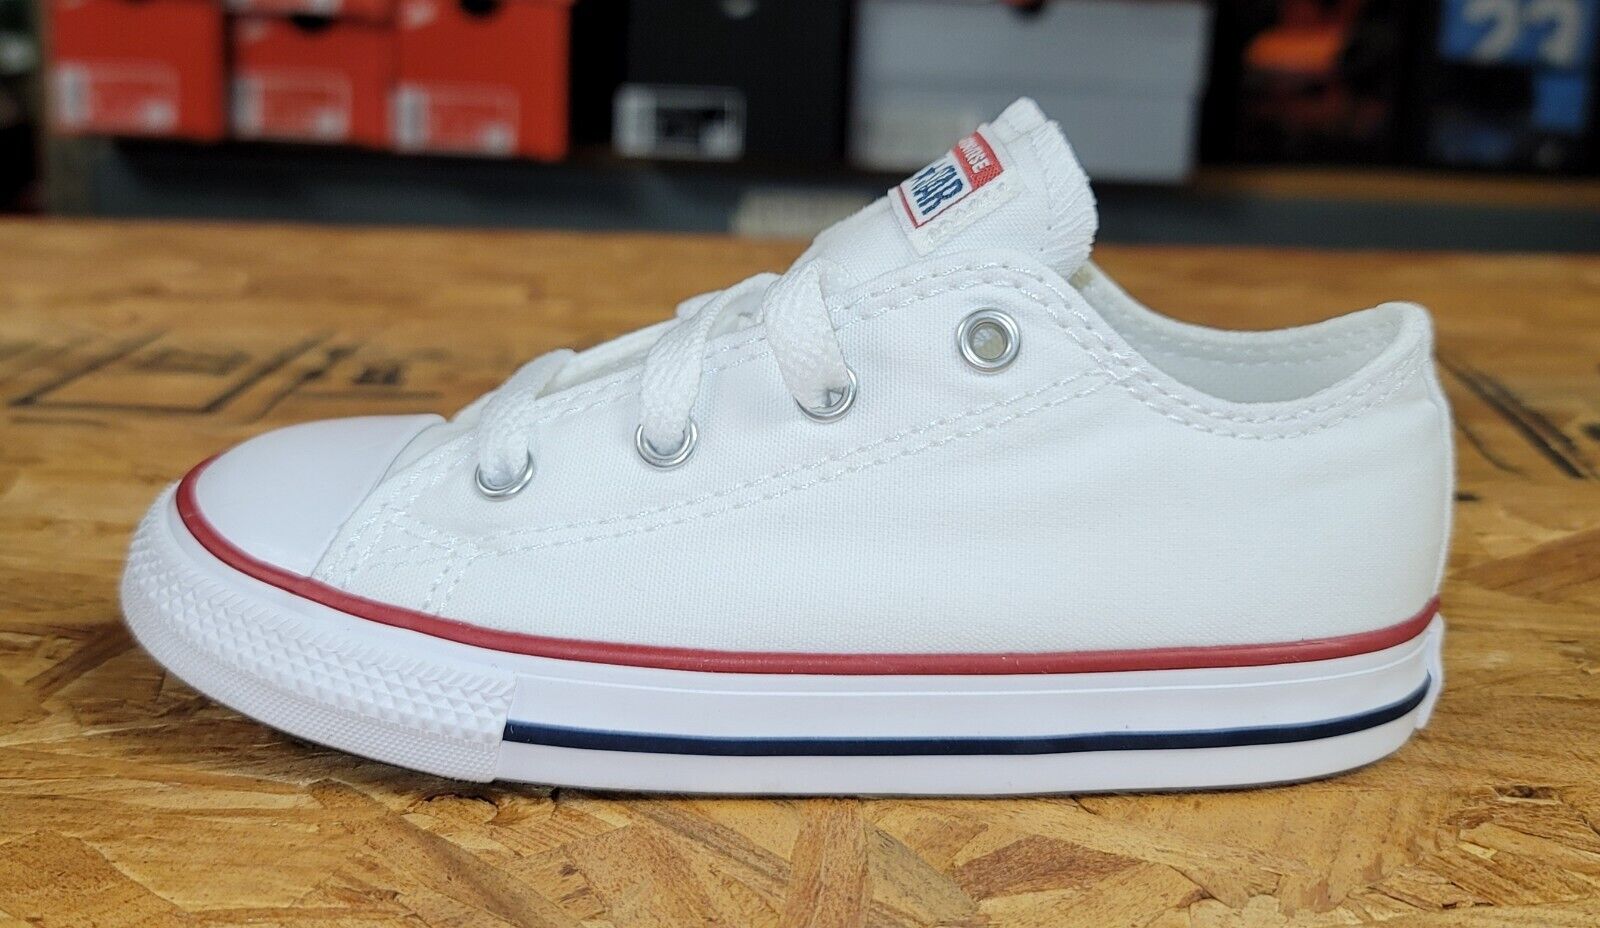 Converse Infant Toddler Chuck Taylor All Star Ox Low Top Optical White 7J256  | eBay